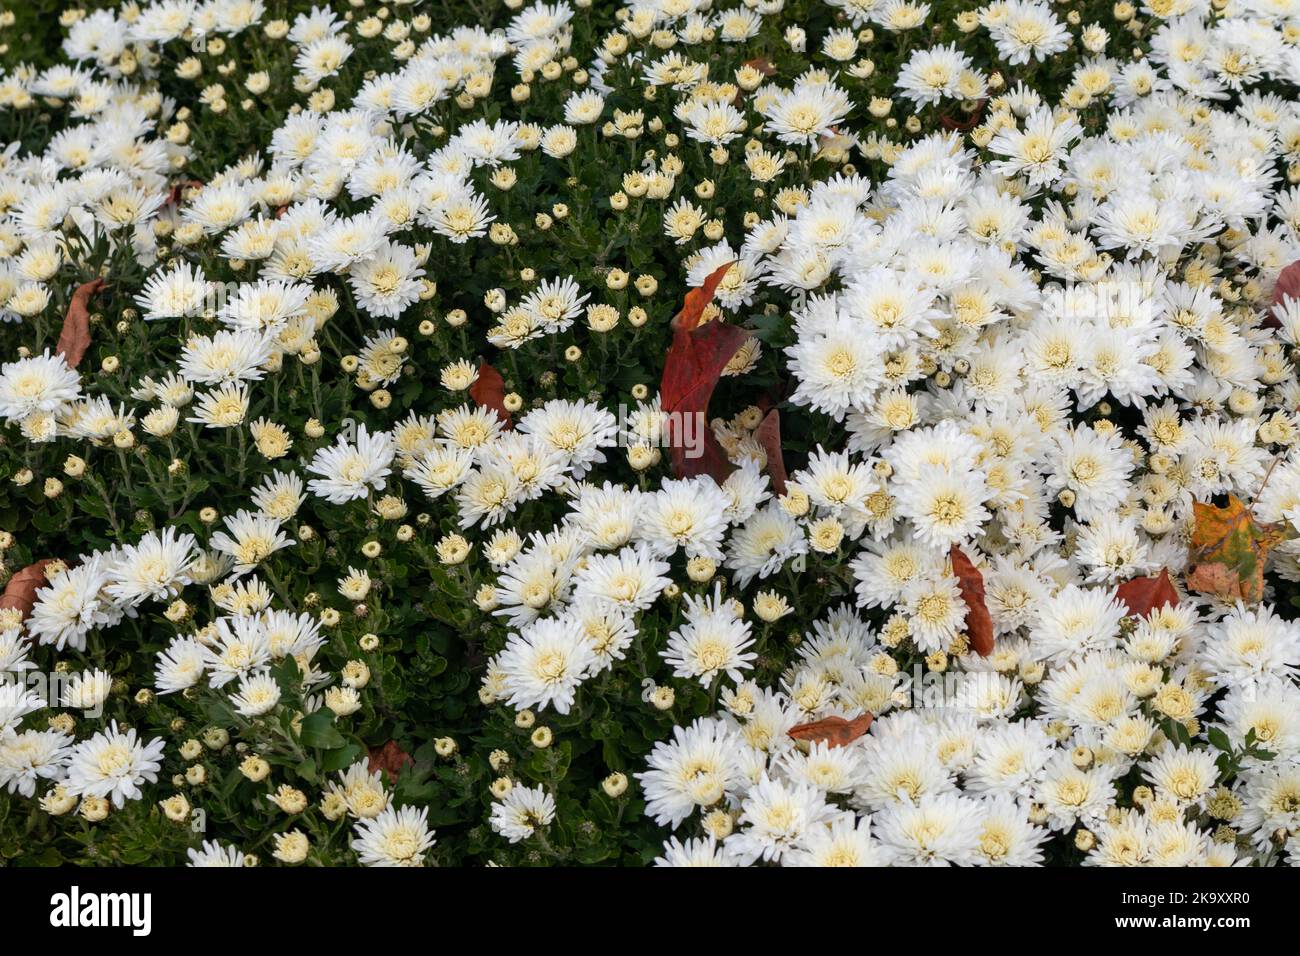 Small white flowers bloom in autumn. Chrysanthemums, chrysanths flowerbed with fallen leaves close-up Stock Photo